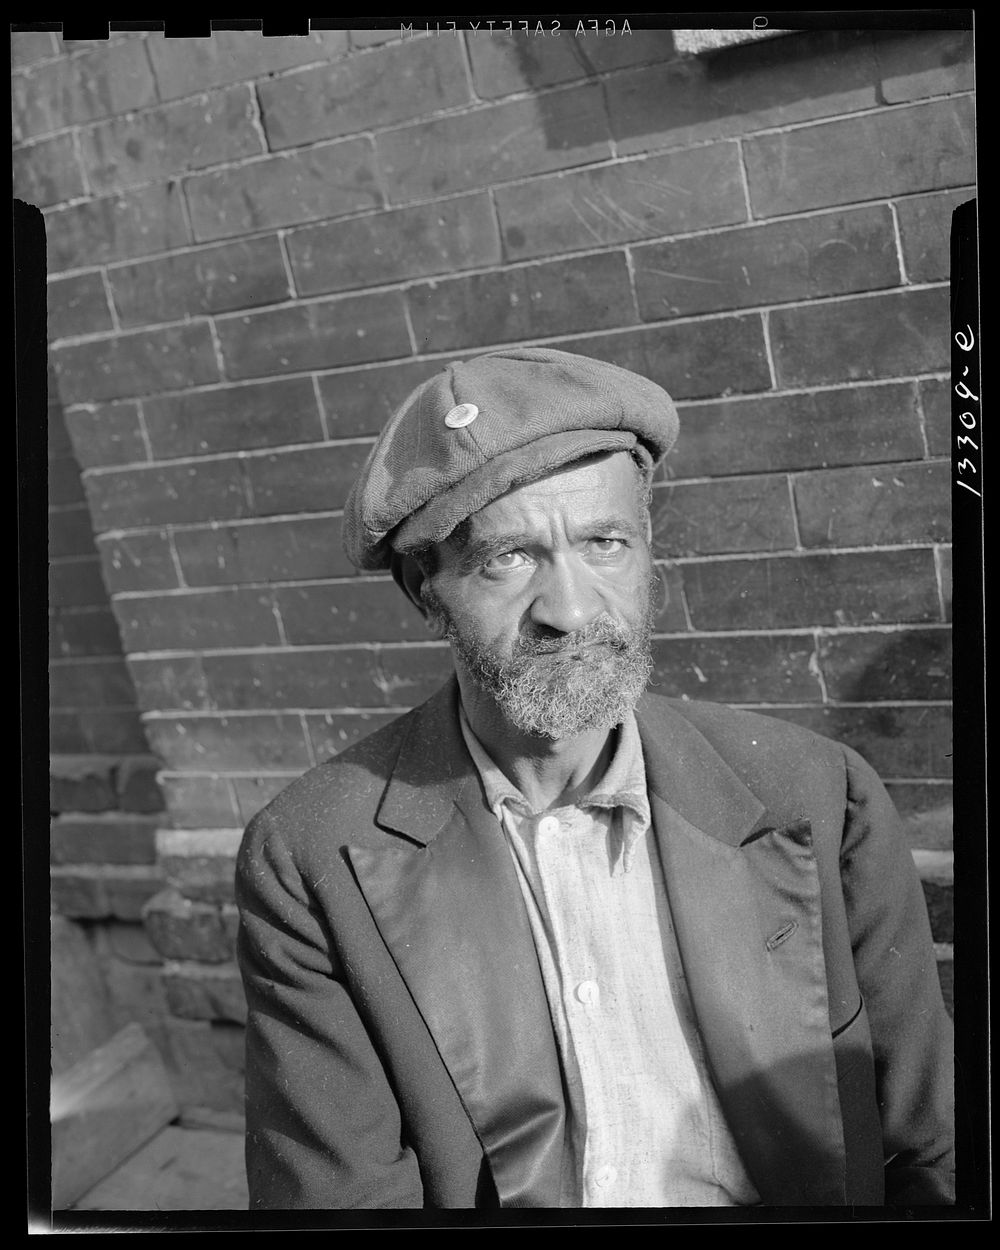 Washington, D.C. An old peanut vendor on Seaton Road. Sourced from the Library of Congress.